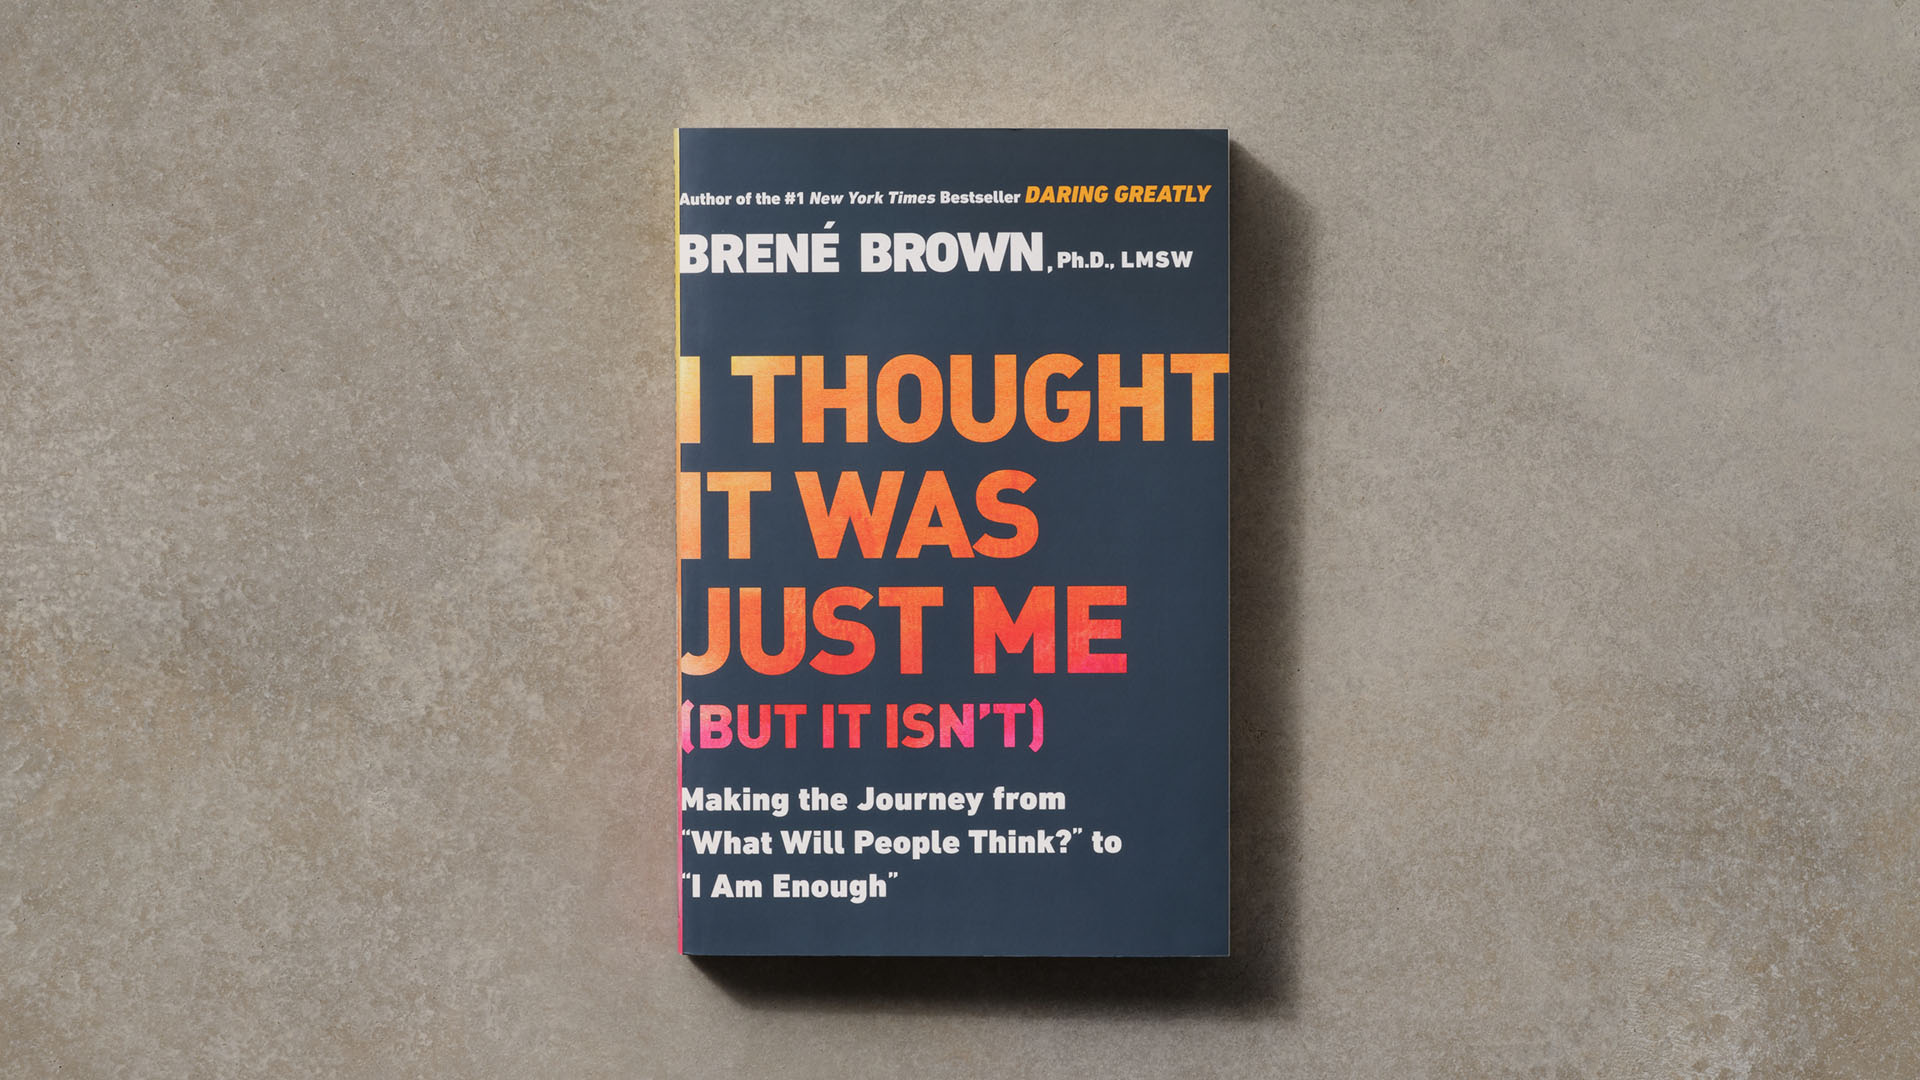 I Thought It Was Just Me (but it isn't) by Brené Brown - Audiobook 